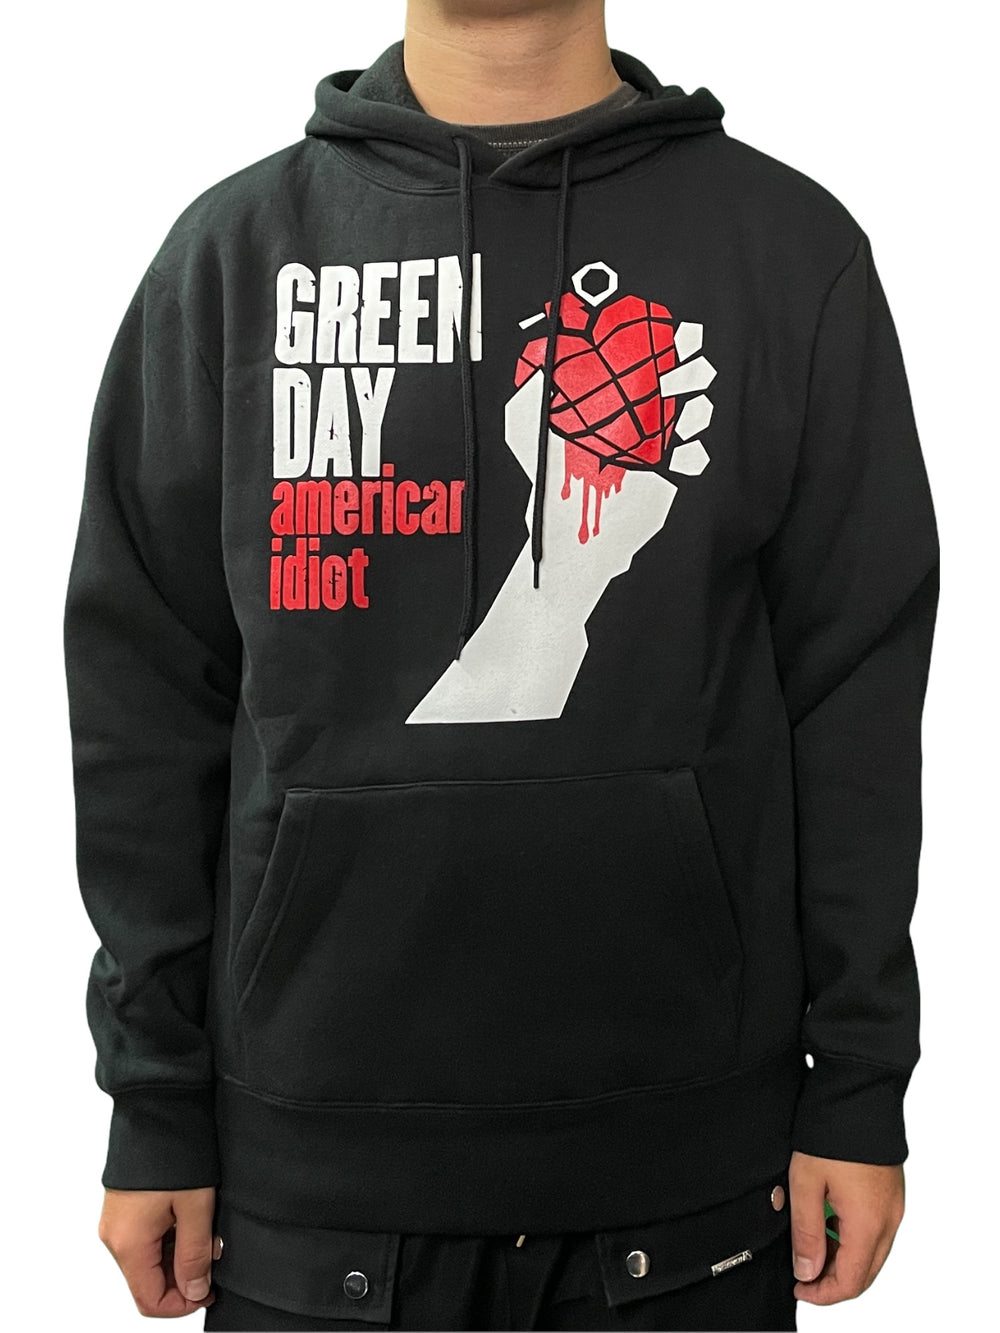 Green Day Idiot Pullover Hoodie Unisex Official Brand New Various Sizes